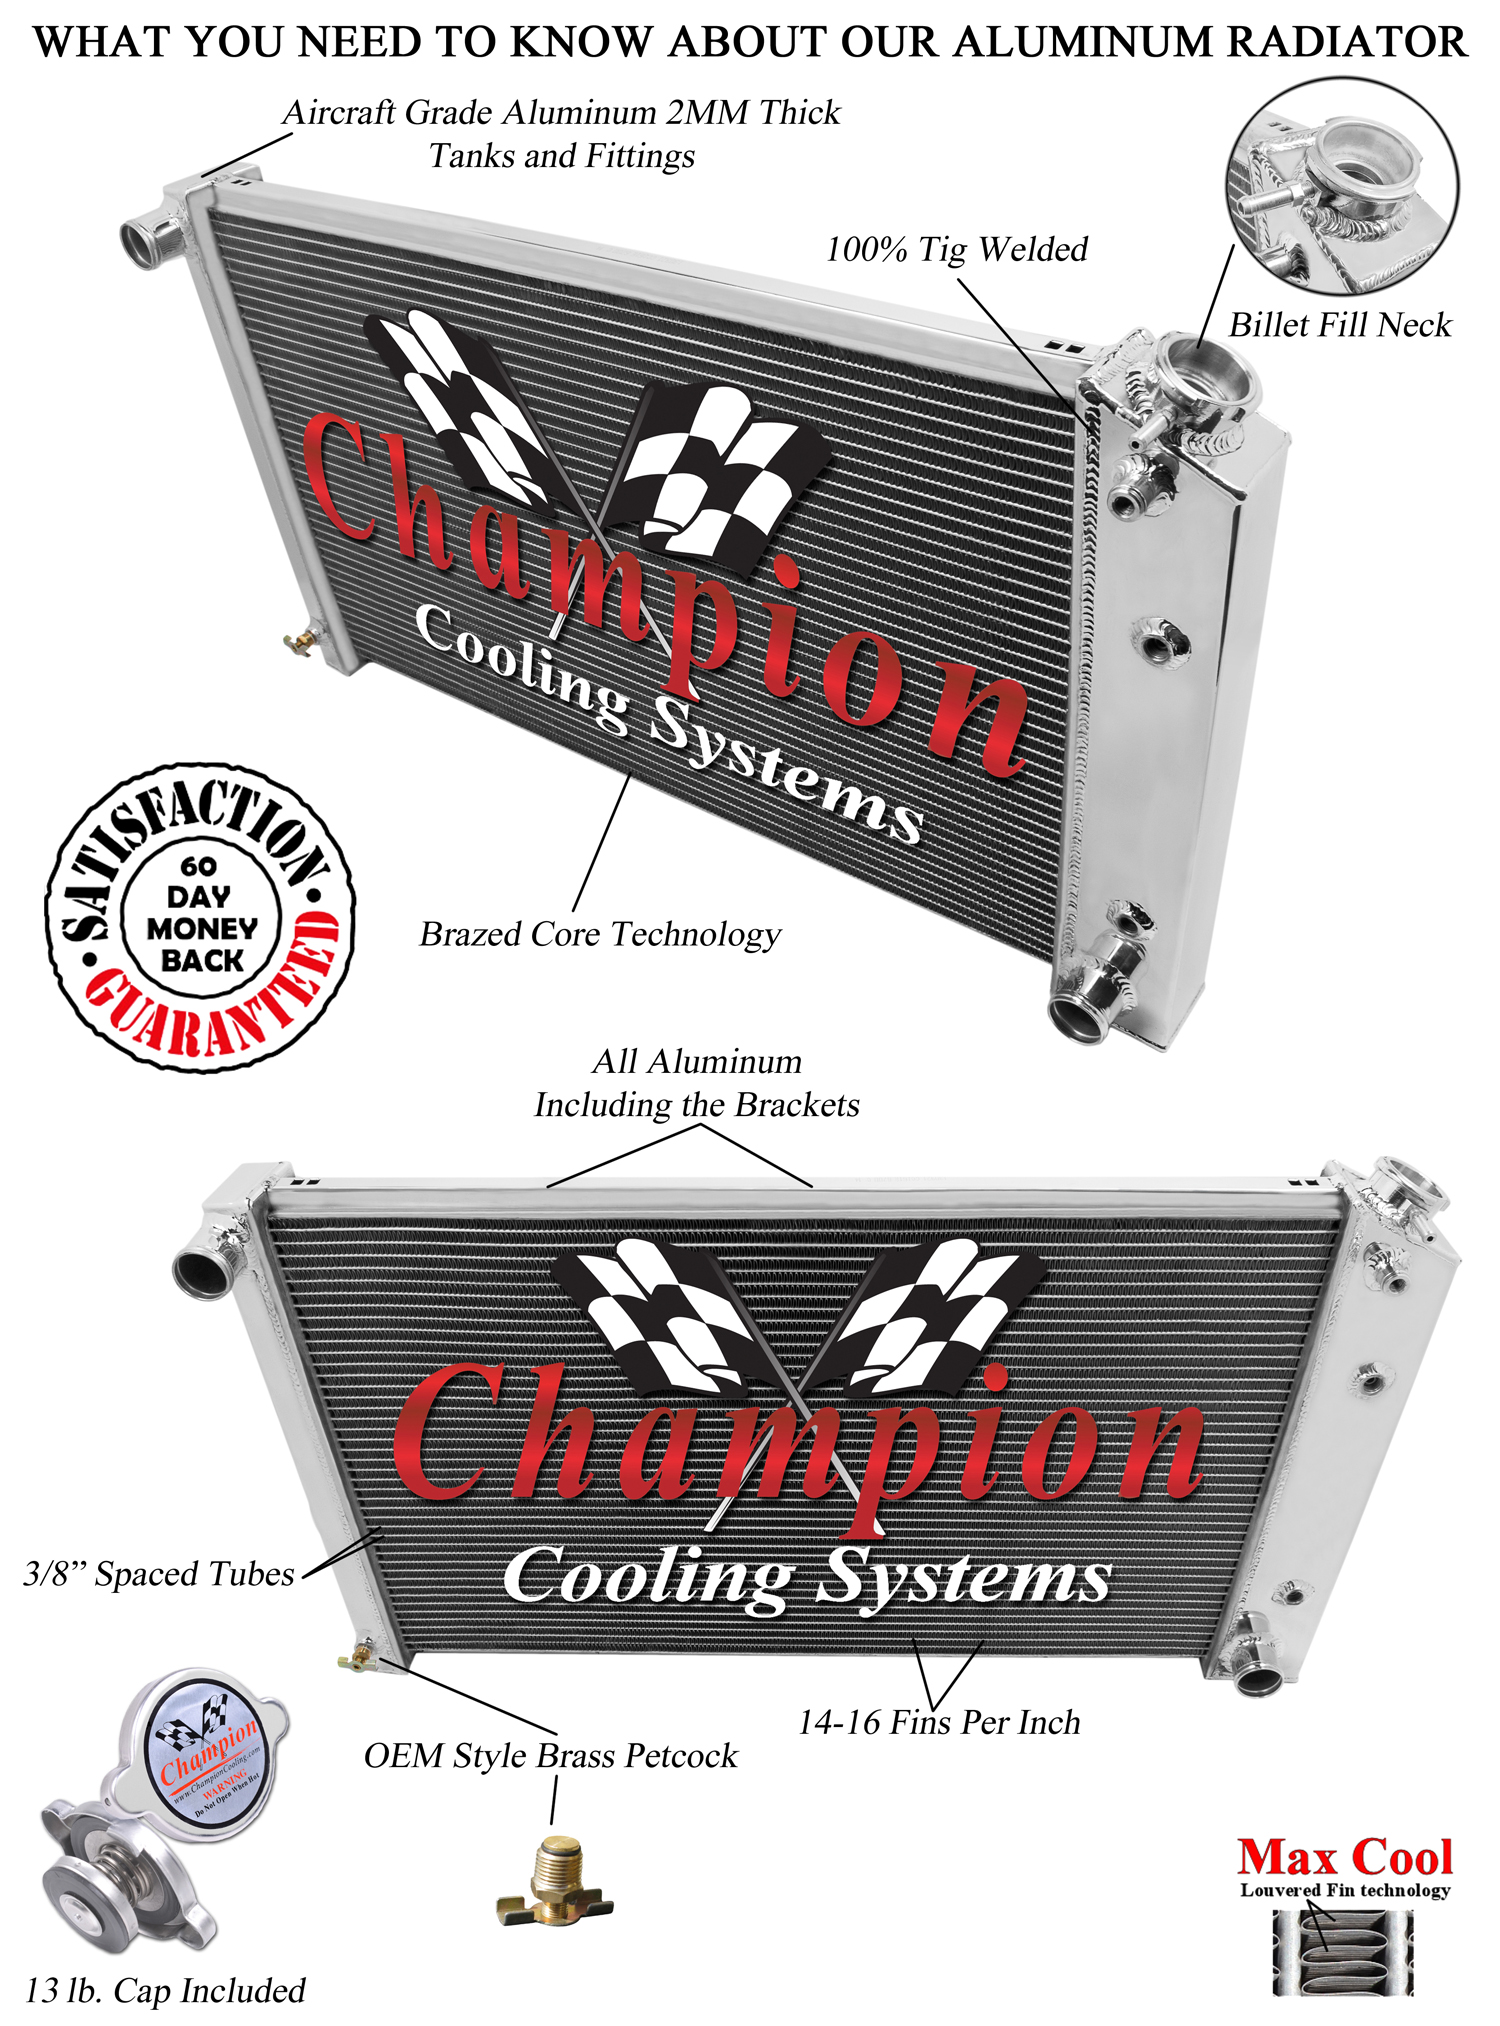 https://www.championcooling.com/photos/Photos%20White/Without%20Fans/161/new/161-DIAGRAM.jpg